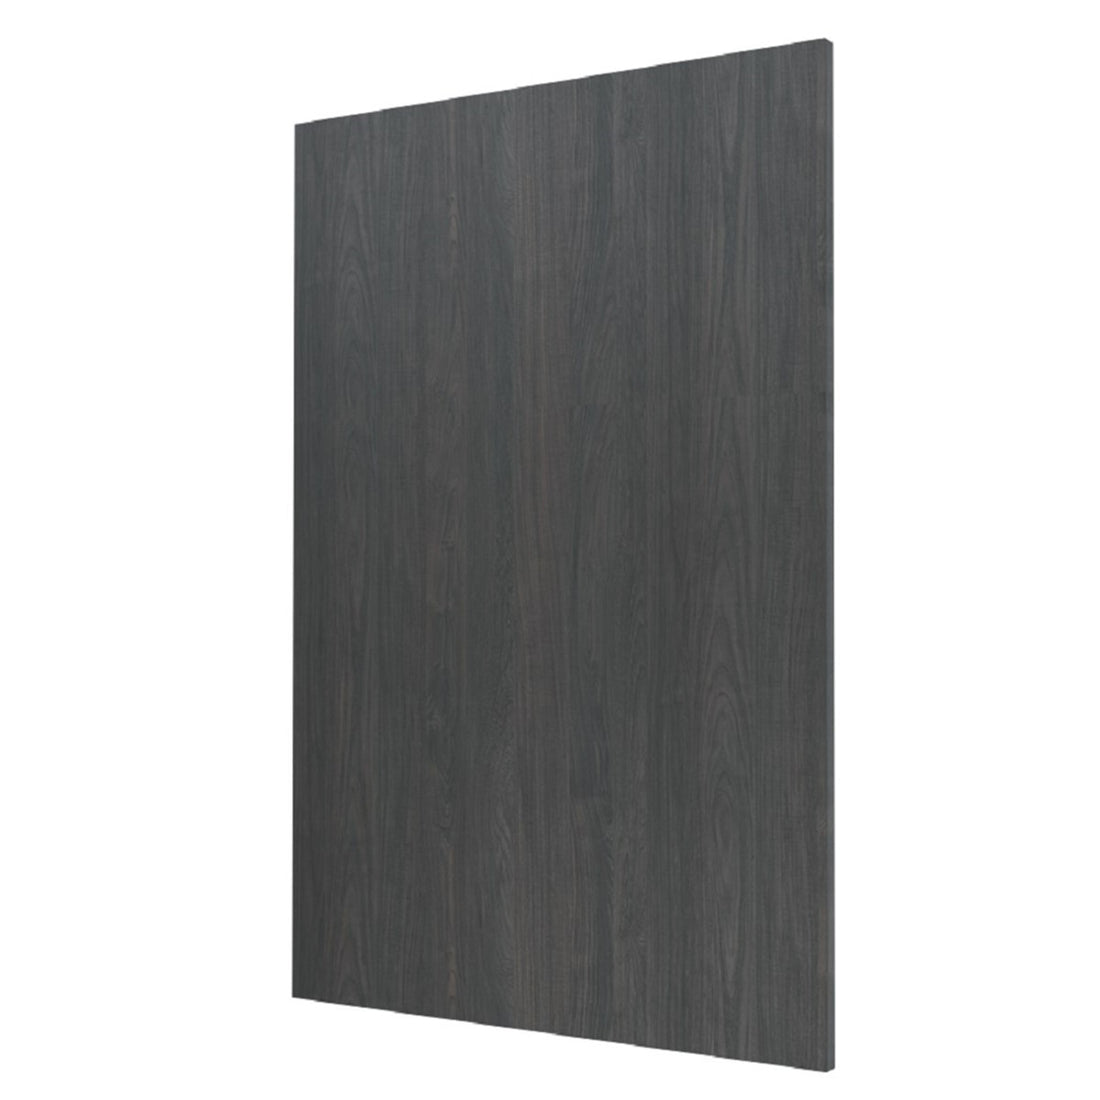 Carbon Marine Slab Style Wall Kitchen Cabinet End Panel (12 in W x 0.75 in D x 42 in H) -  Pro-Edge HD